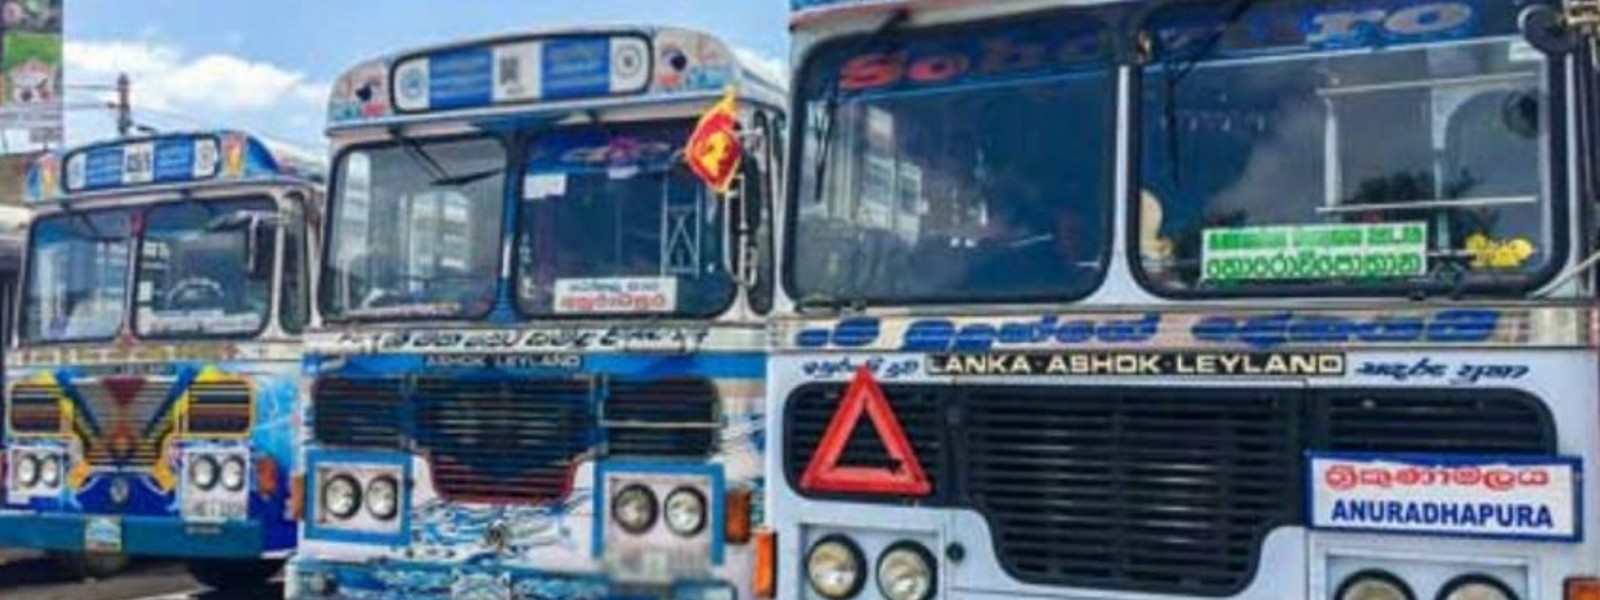 #FUELCRISIS: Private Bus services at a standstill